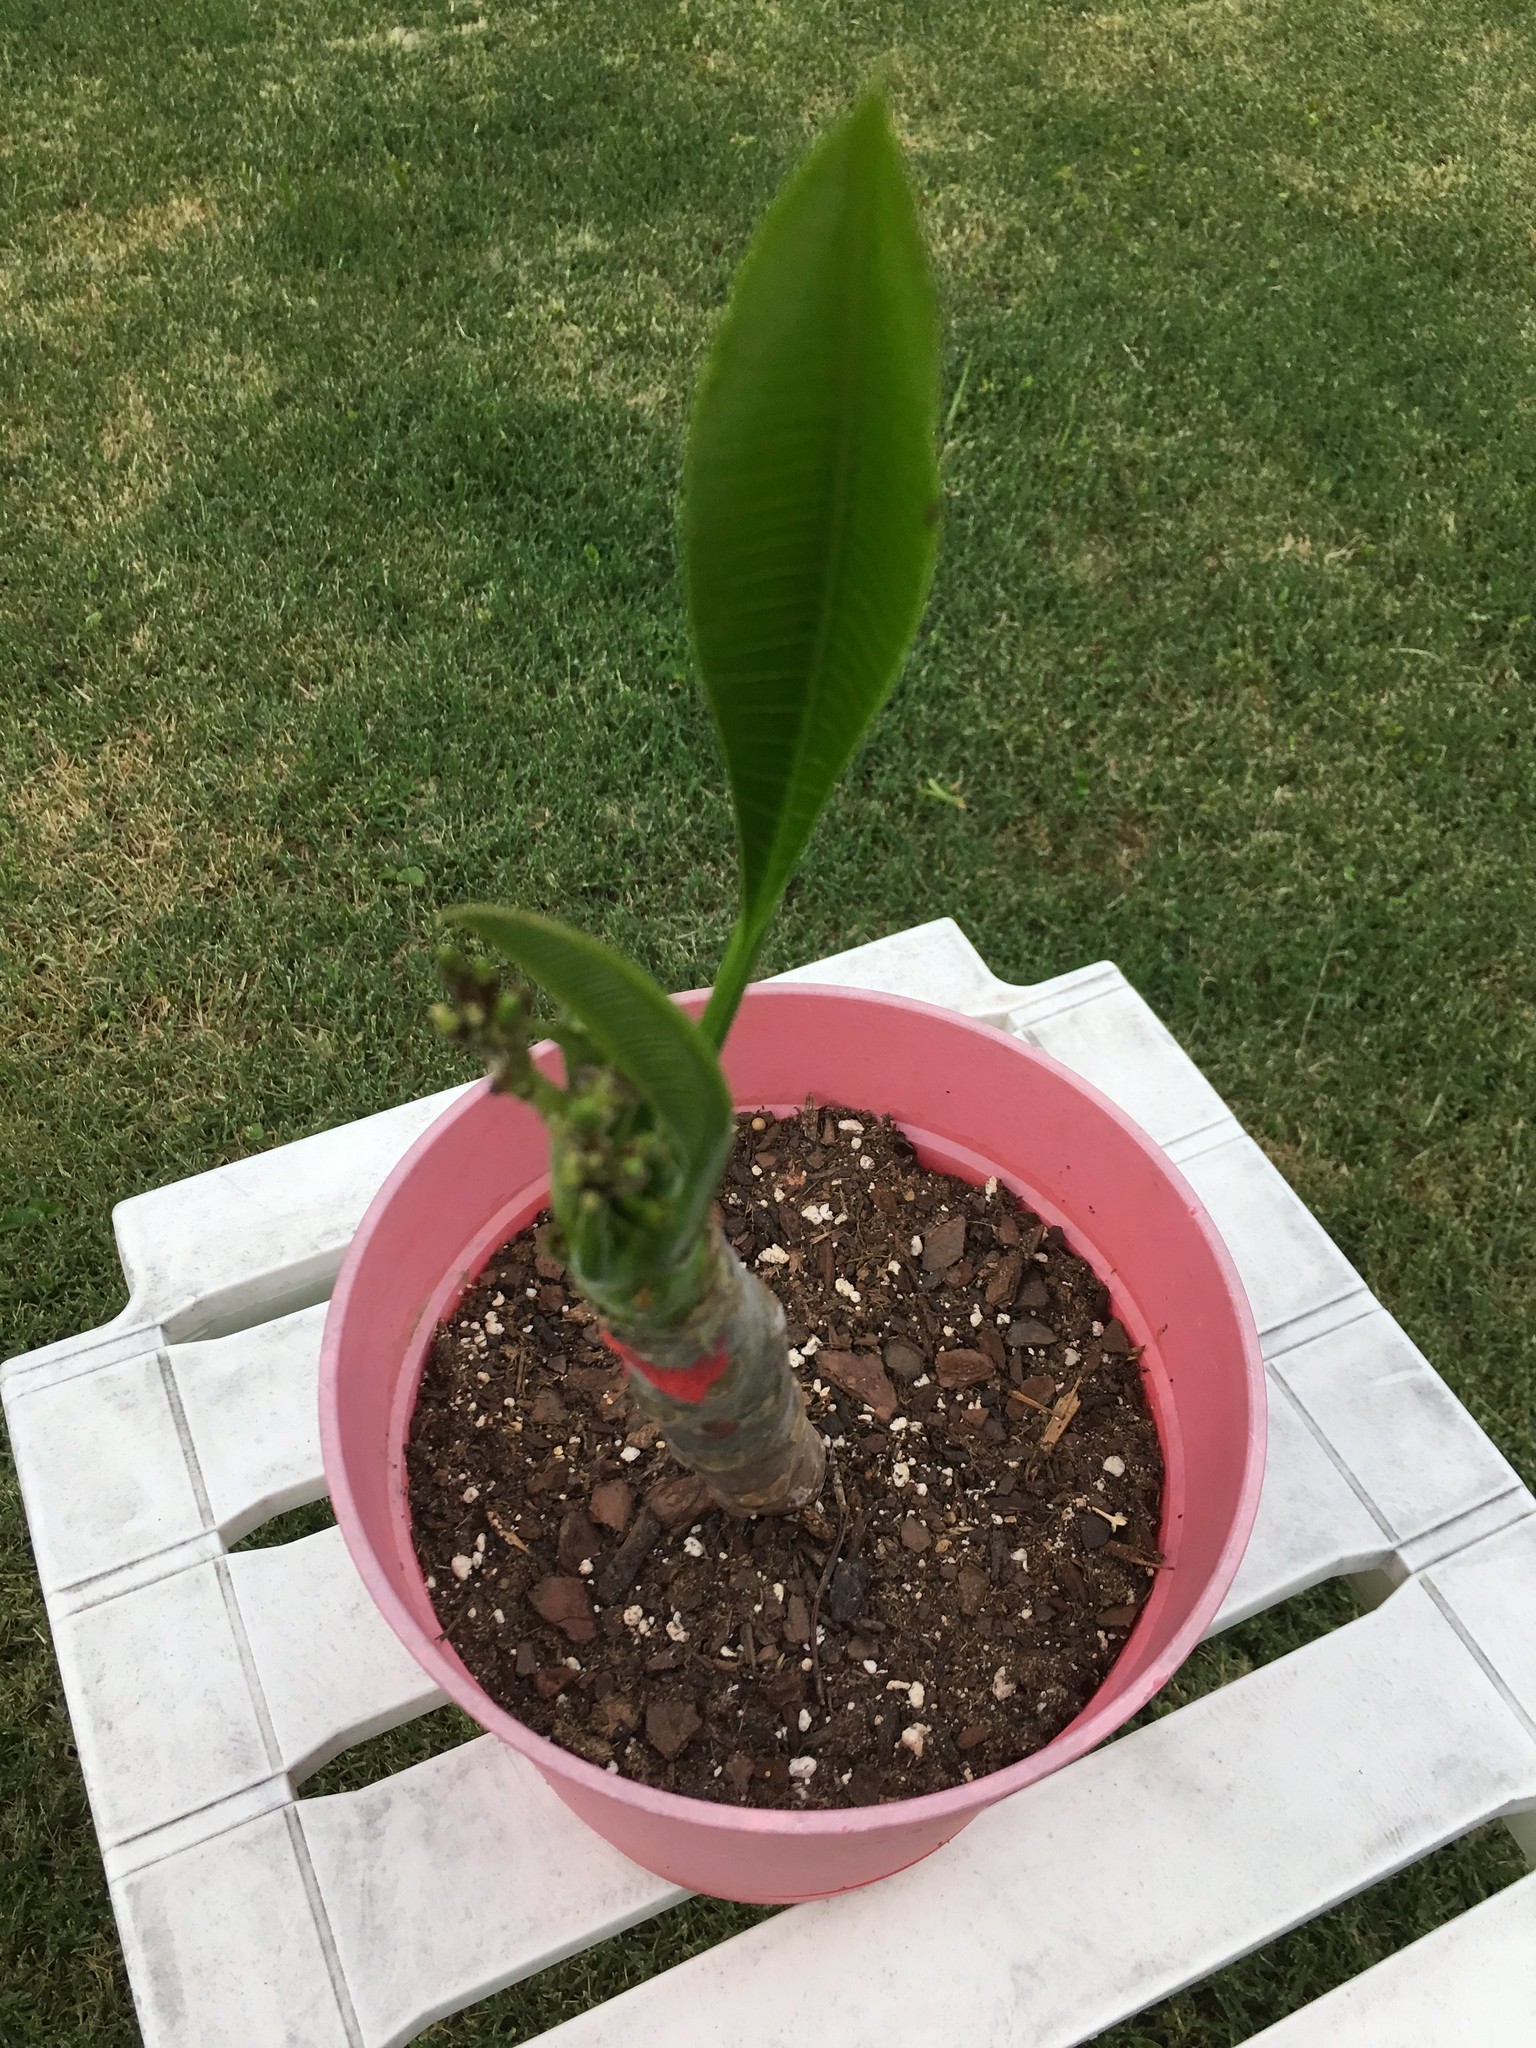 Not just a stick, graduated to plant status.